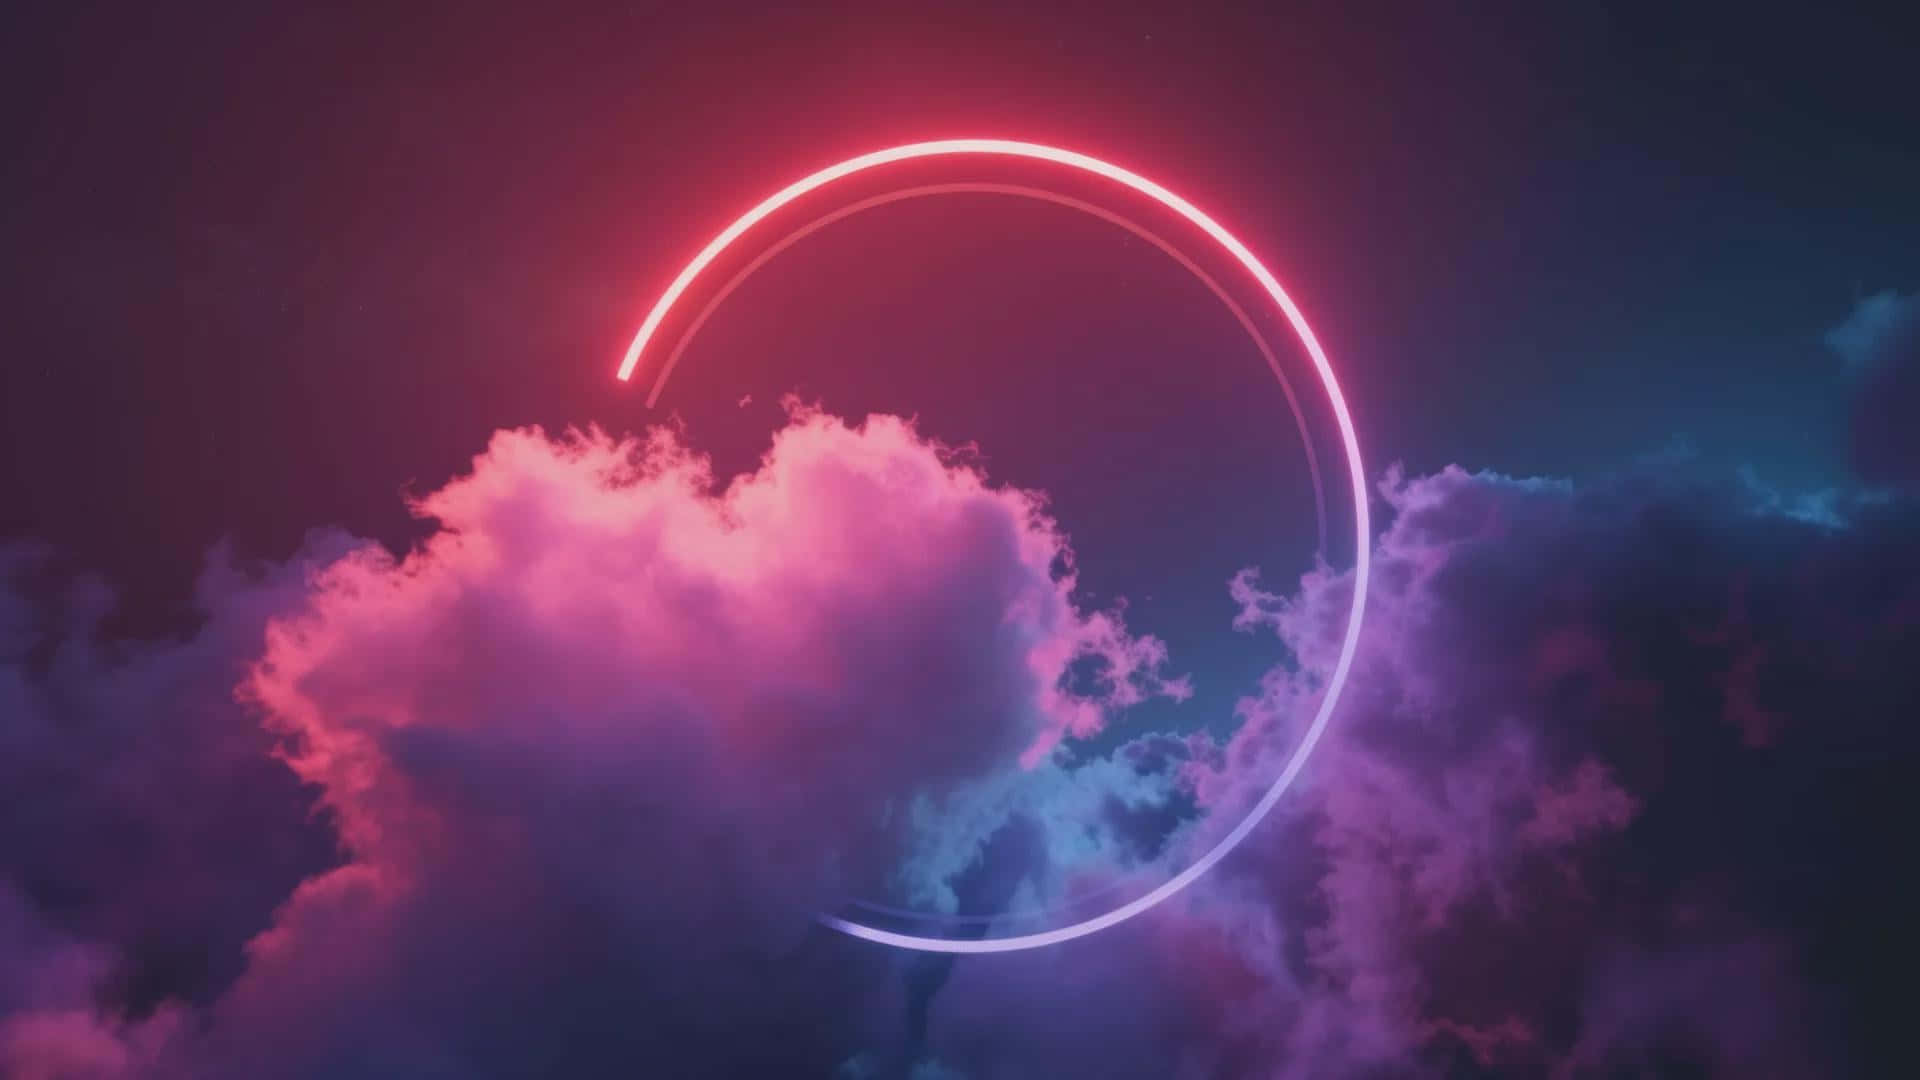 Abstract Neon Circle Clouds Wallpaper